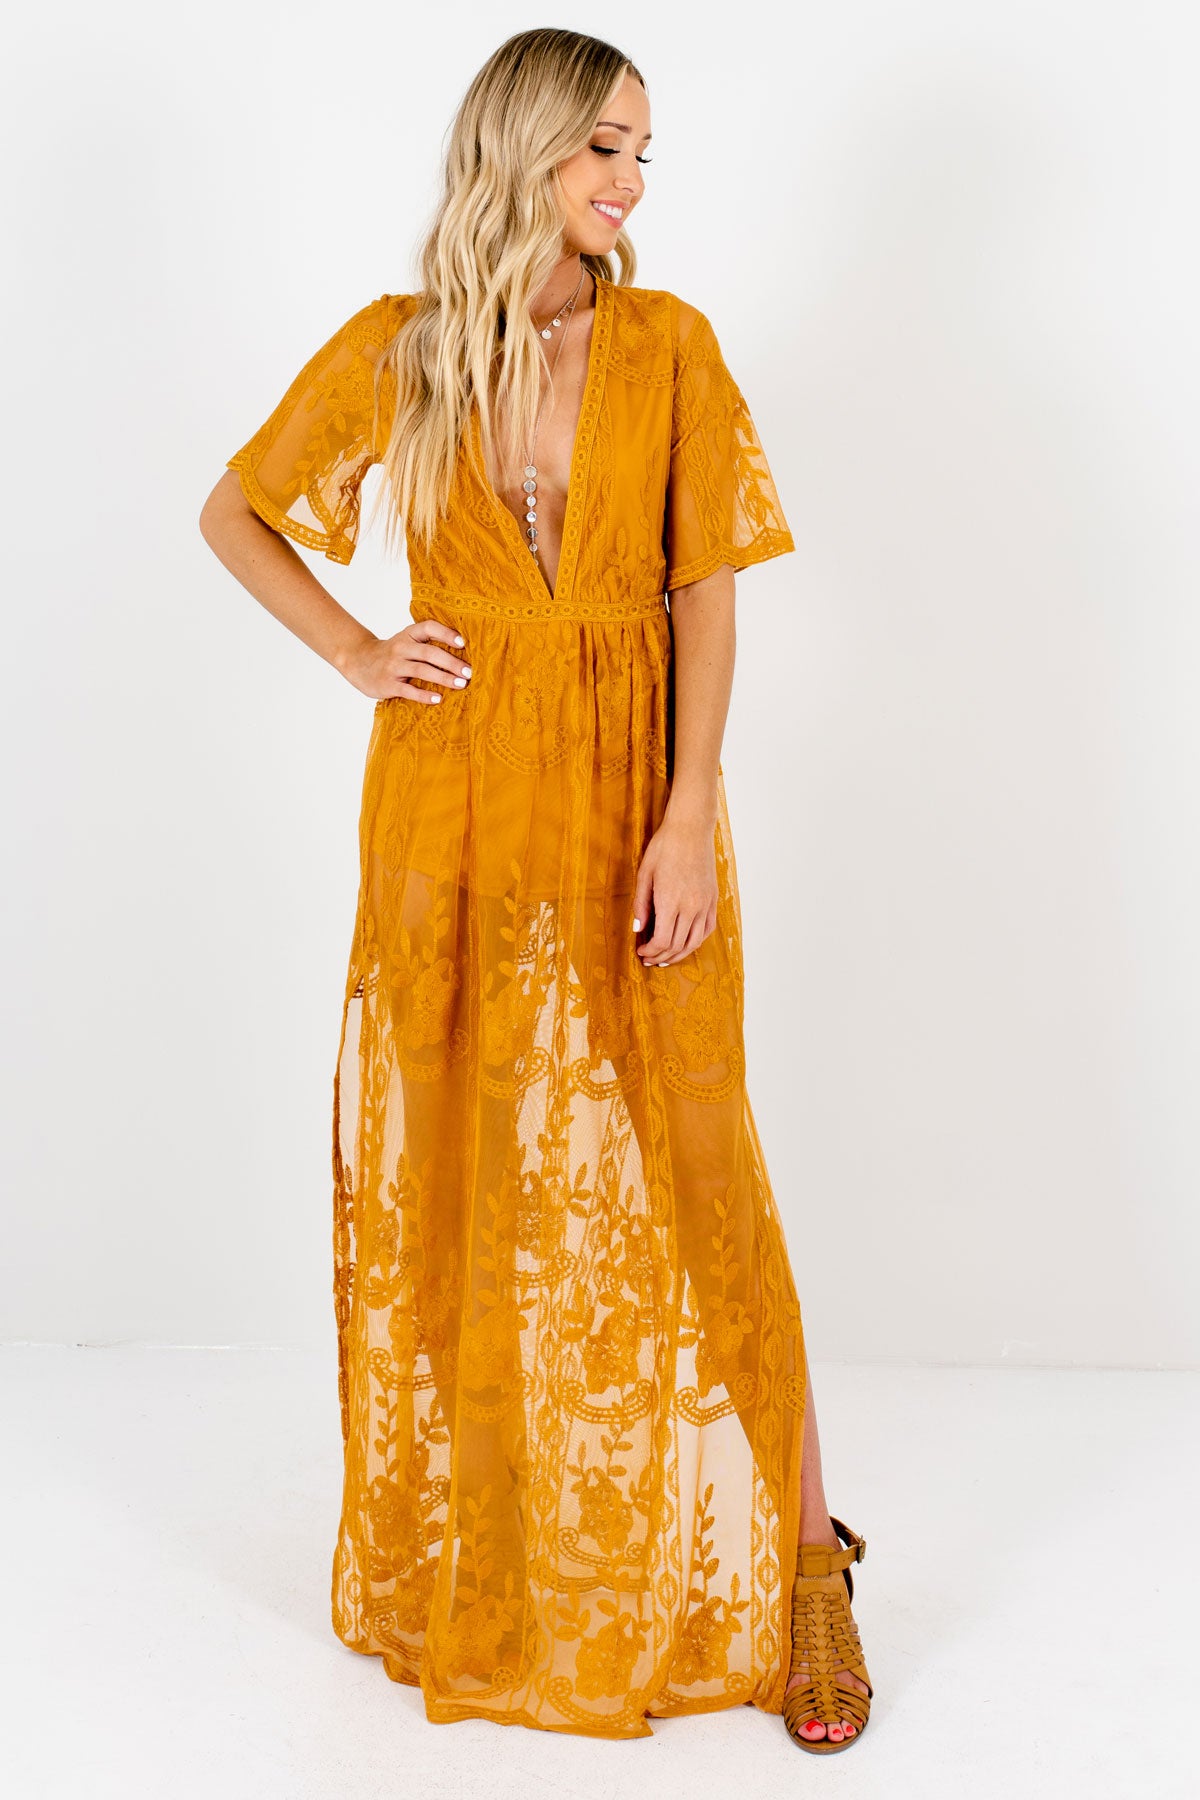 Mustard Yellow Floral Crochet Lace Overlay Maxi Length Romper Dresses